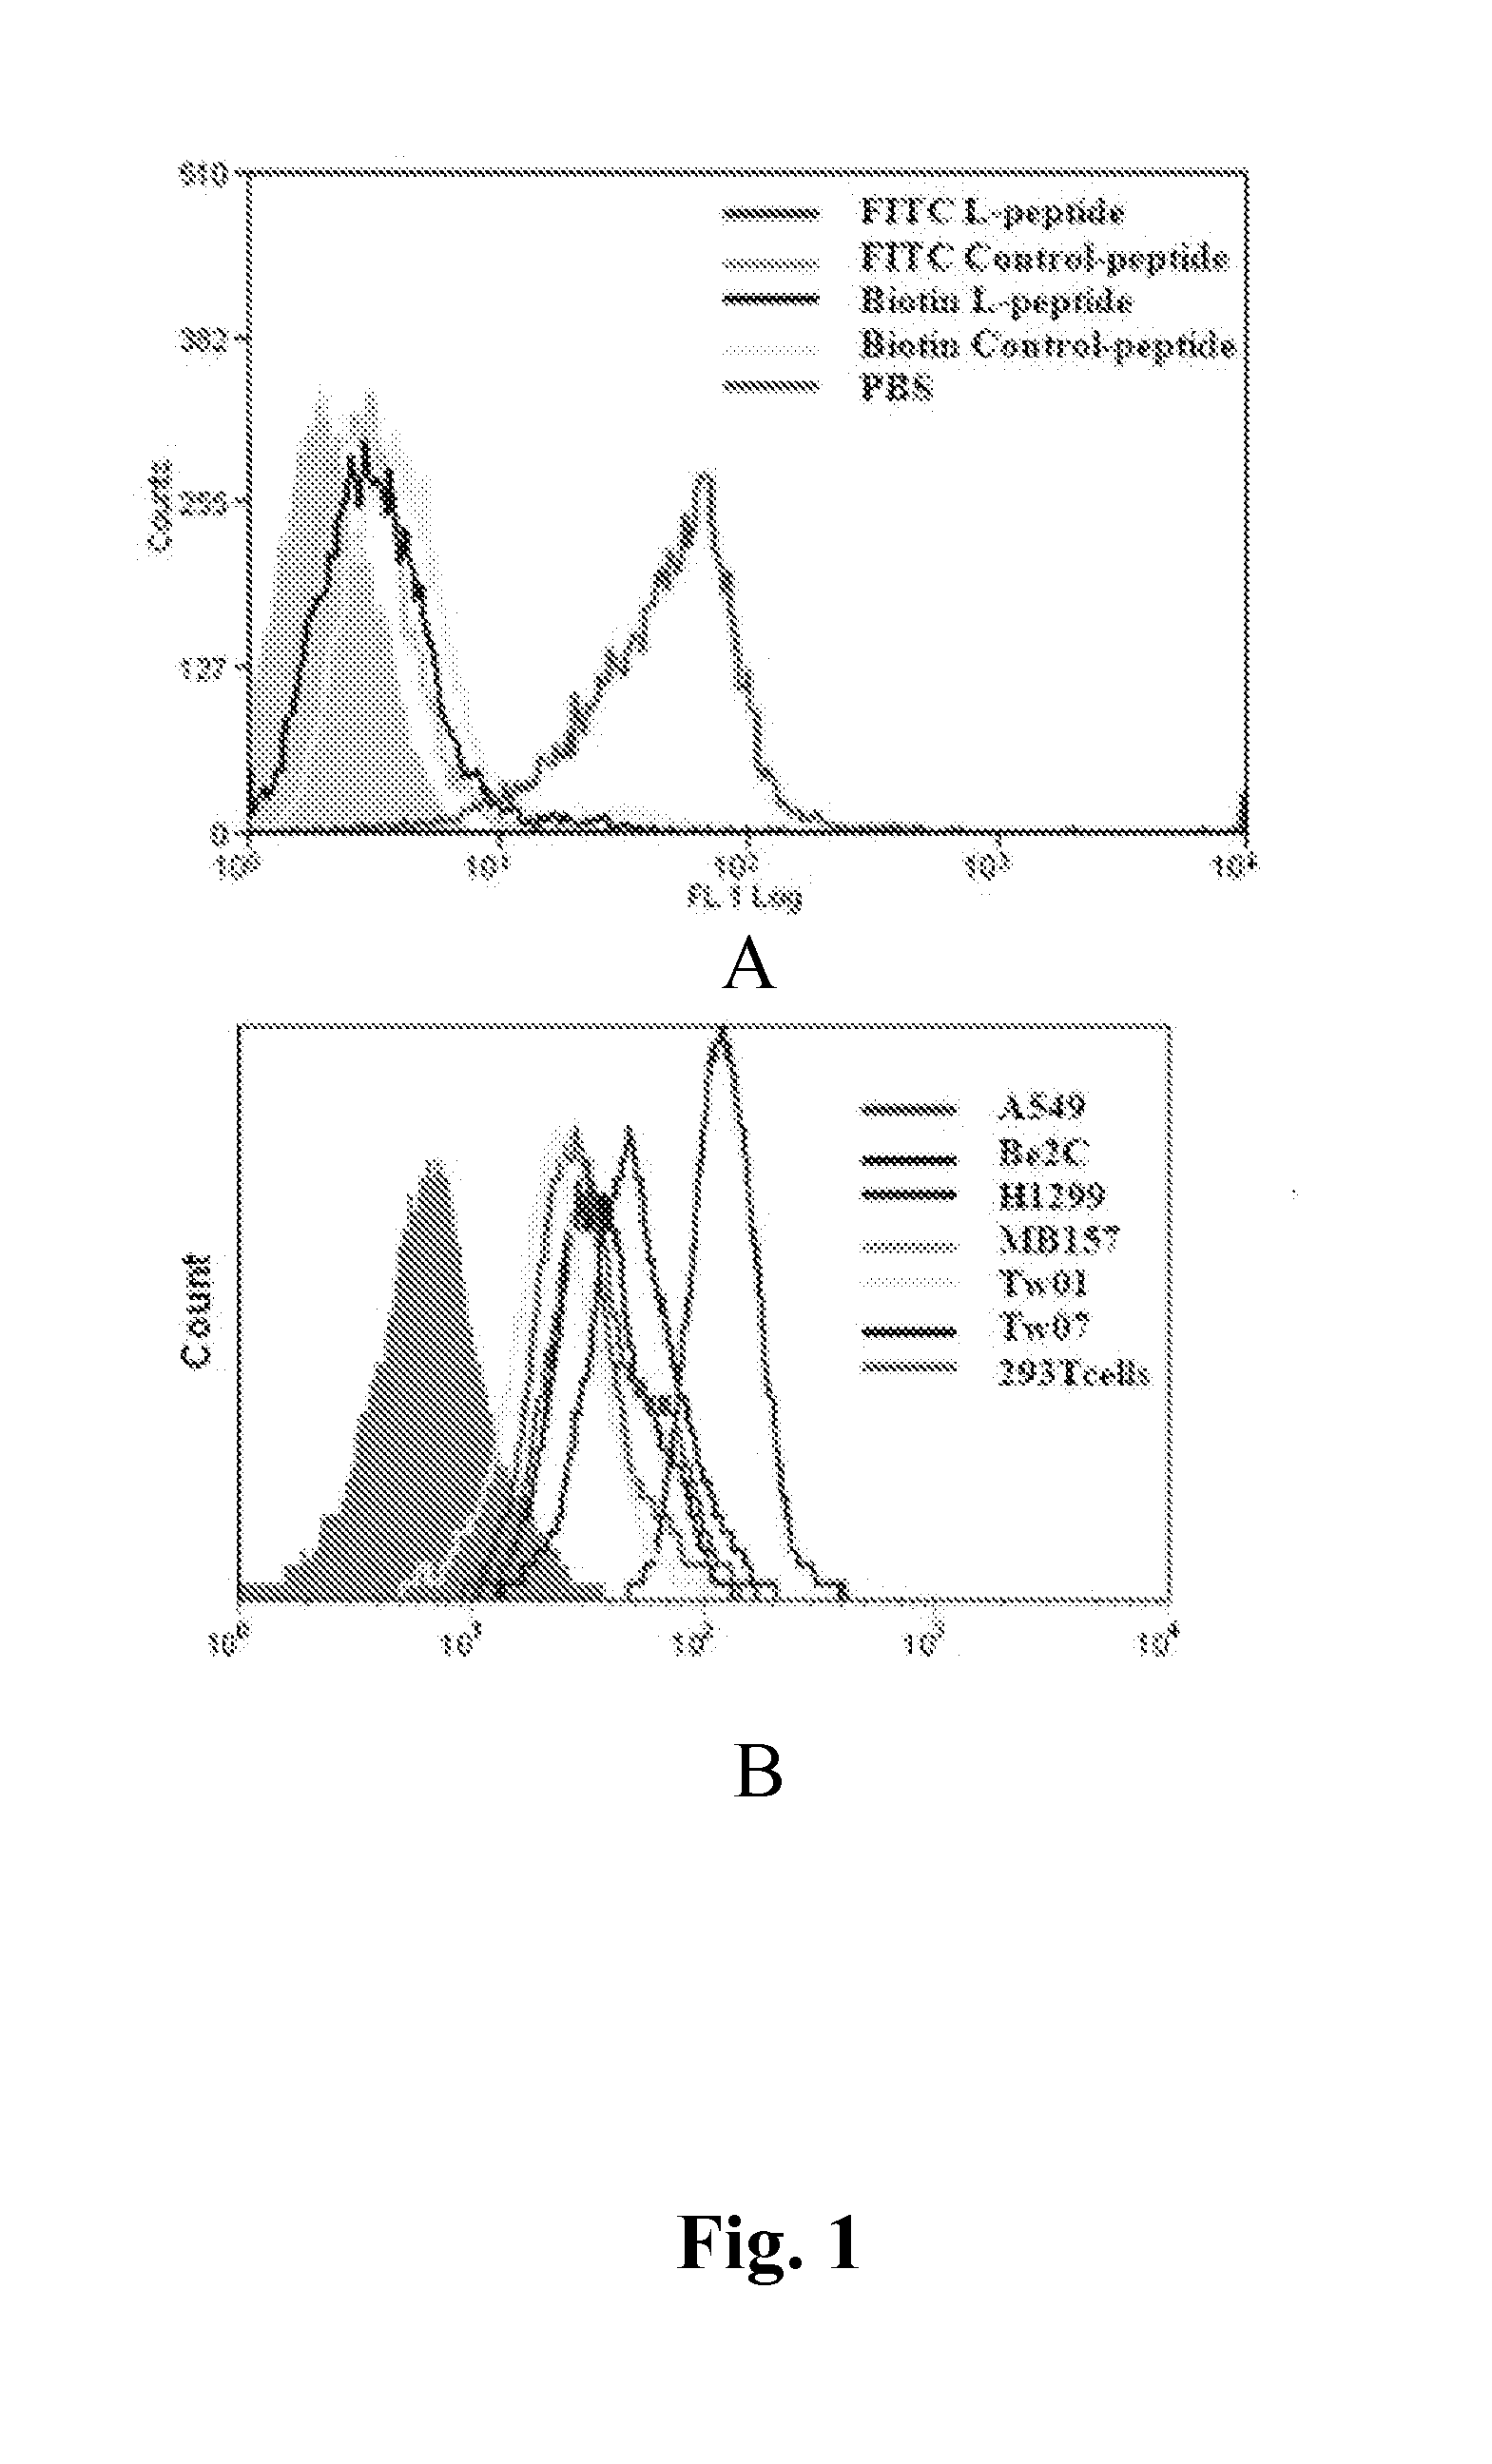 Method for peptide histochemical diagnosis